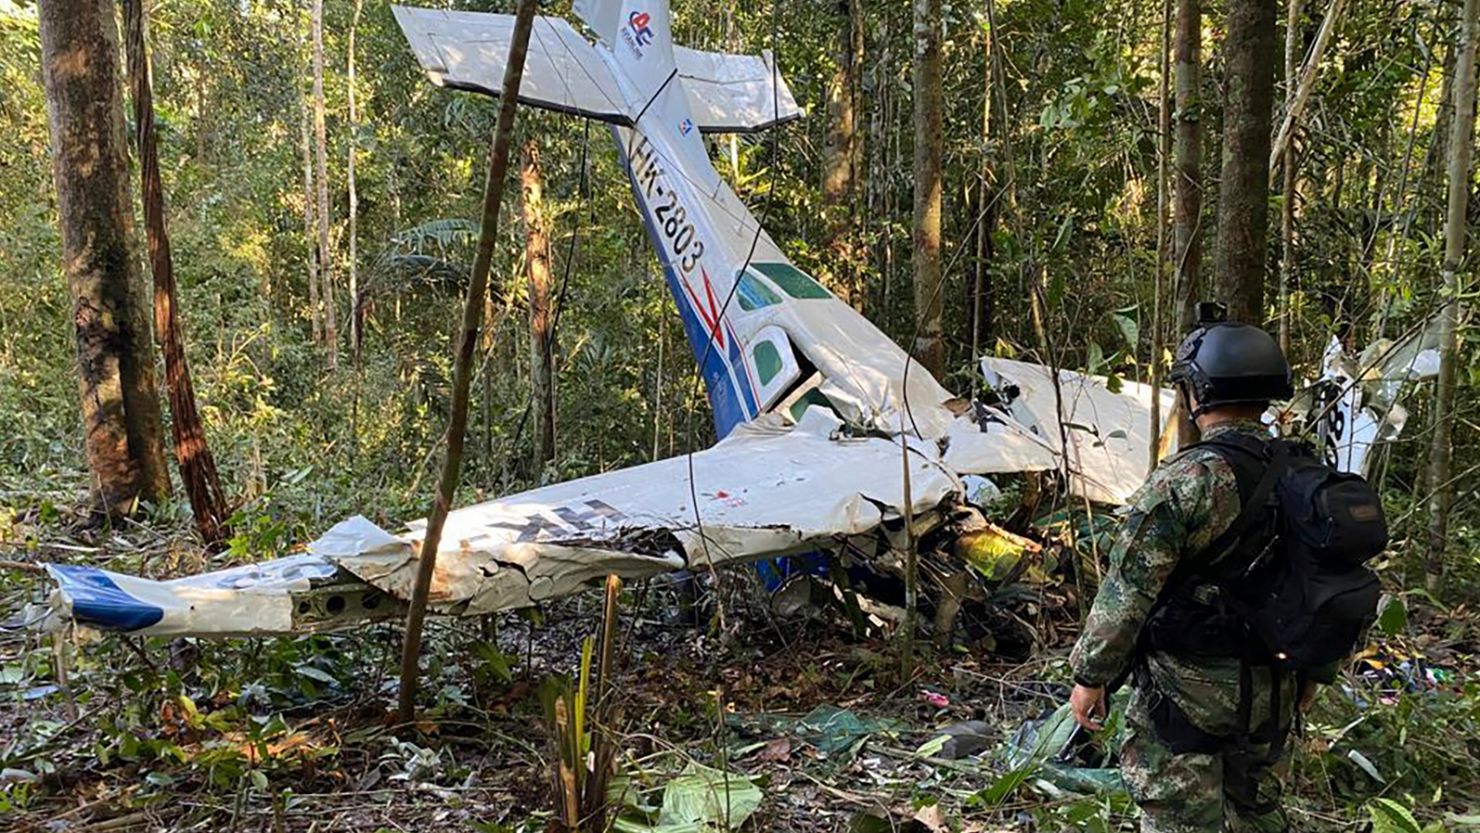 Colombia is waiting for a sign of life from the four indigenous children who vanished into the jungle following a plane crash on May 1.